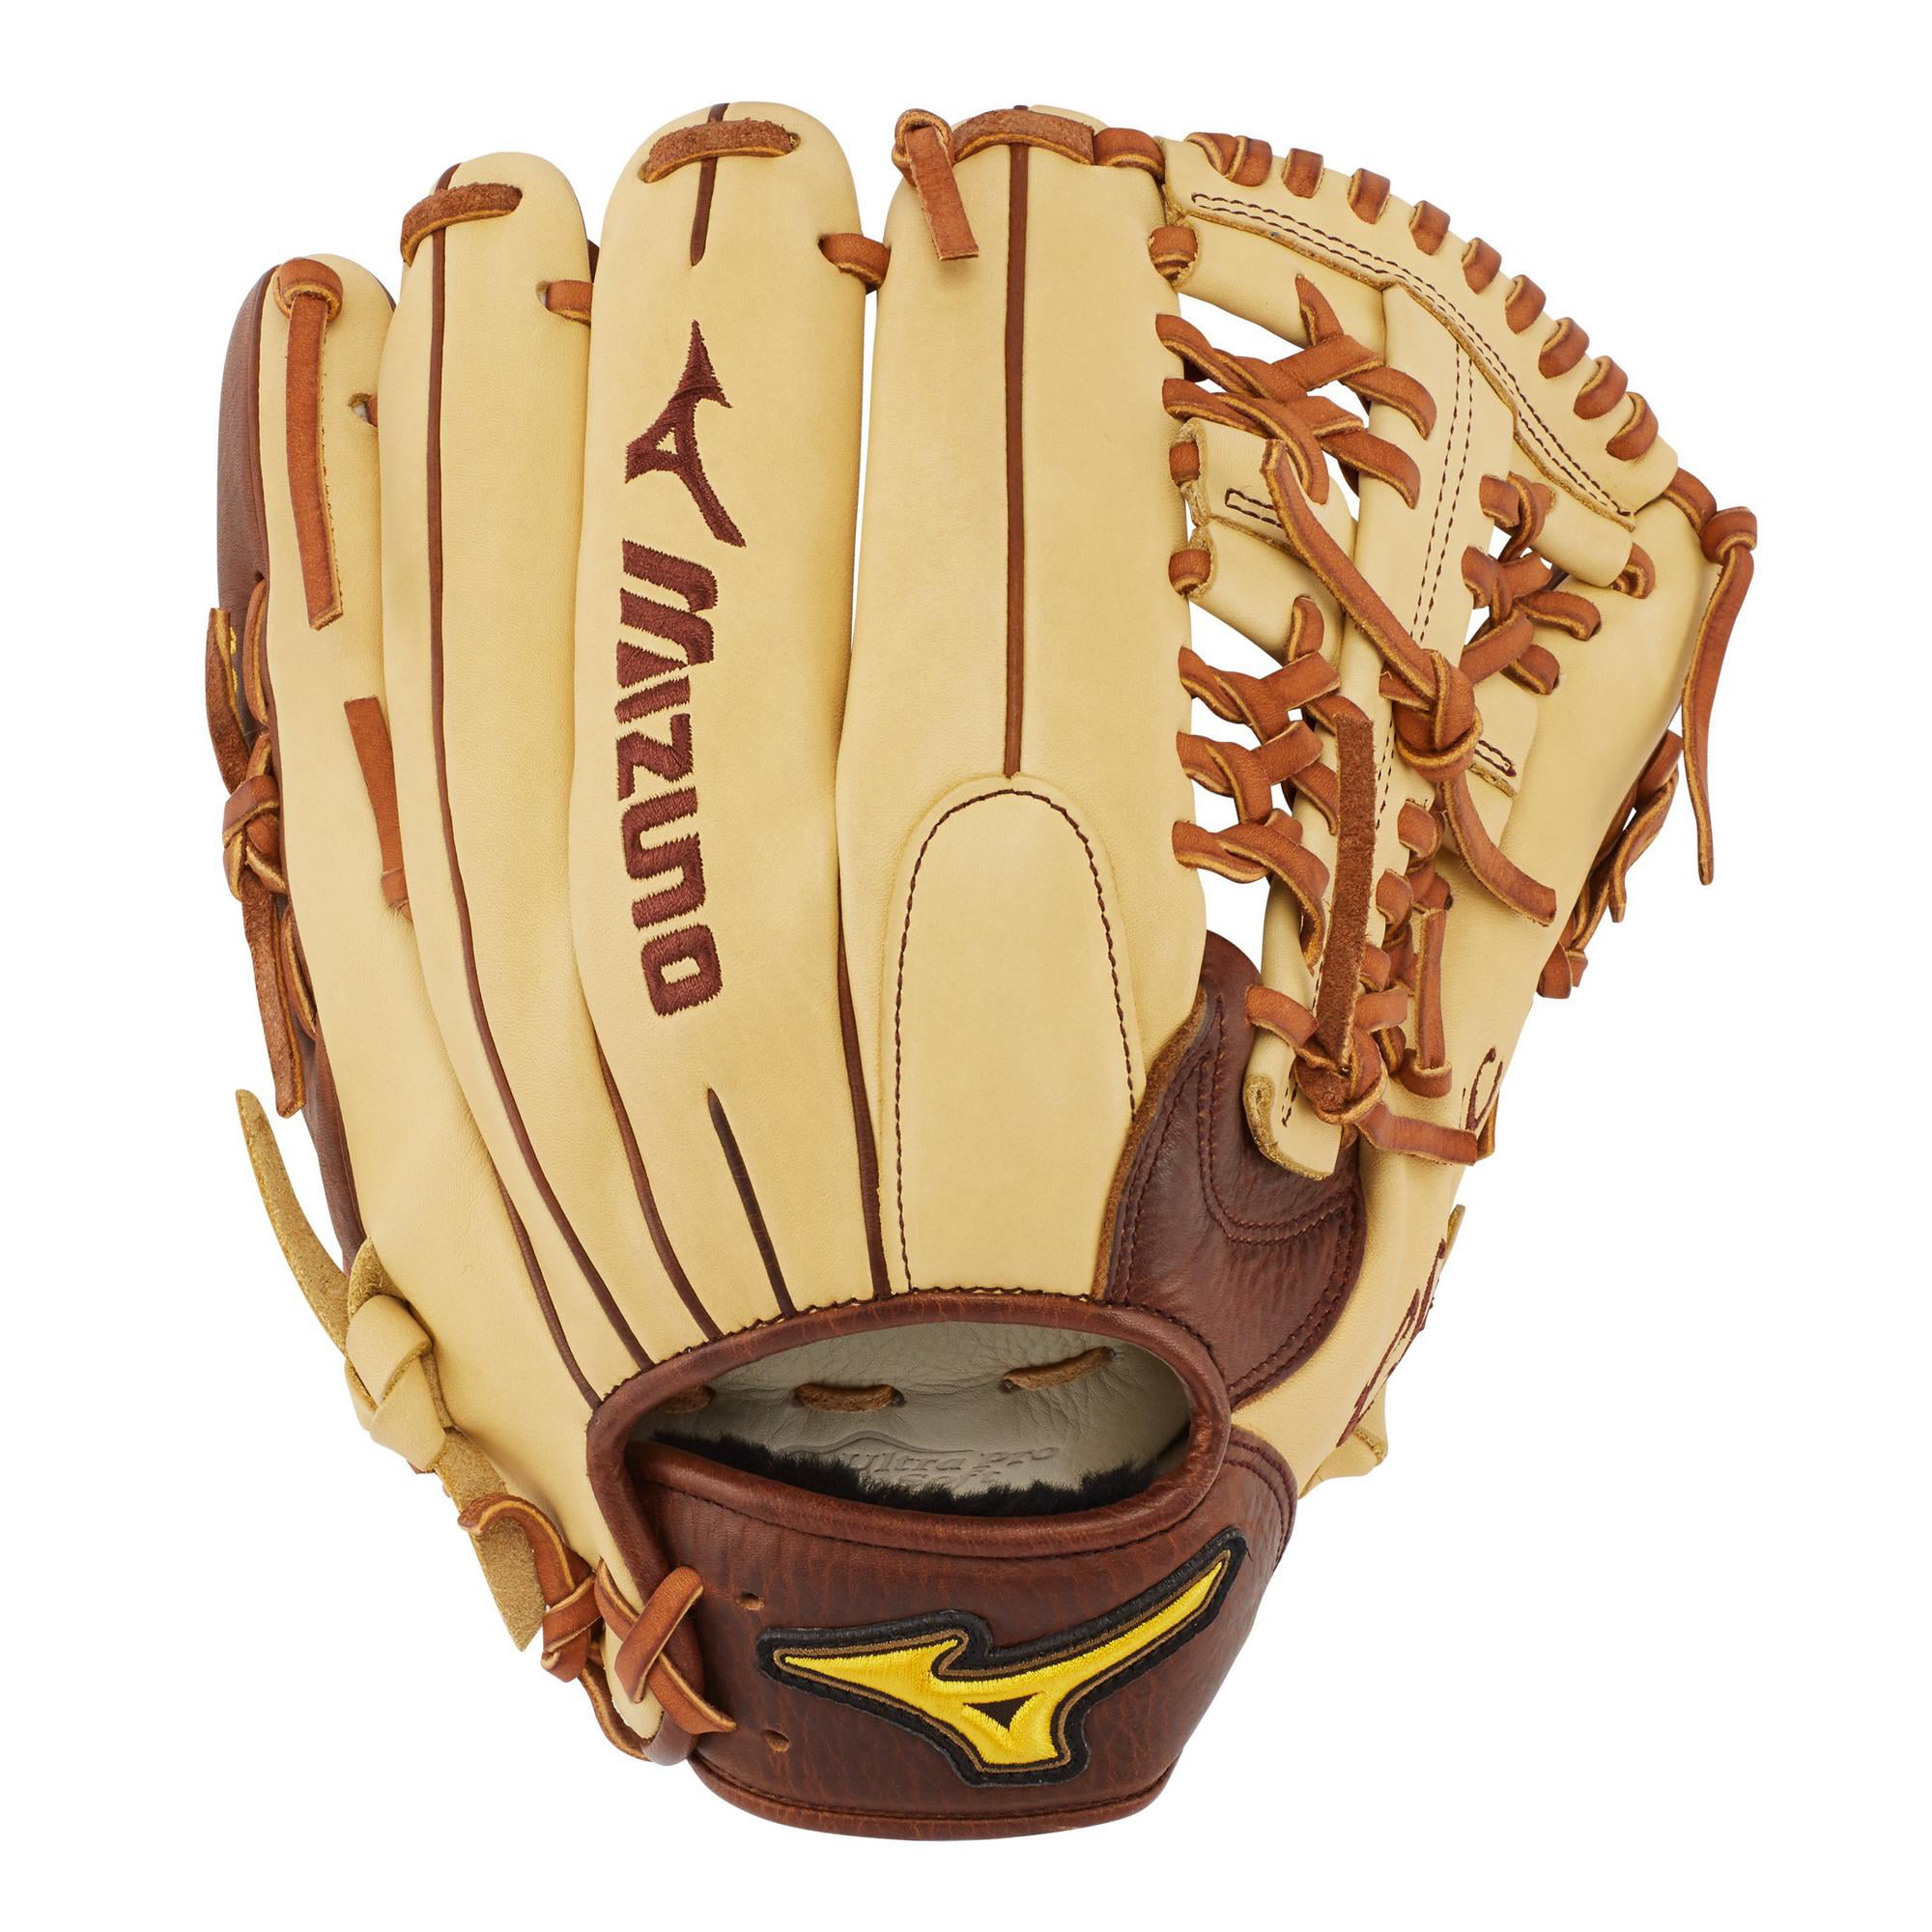 Details about   MIZUNO Baseball Softball Glove Right Handed Throw 13" MFR 1302 Durango Leather 